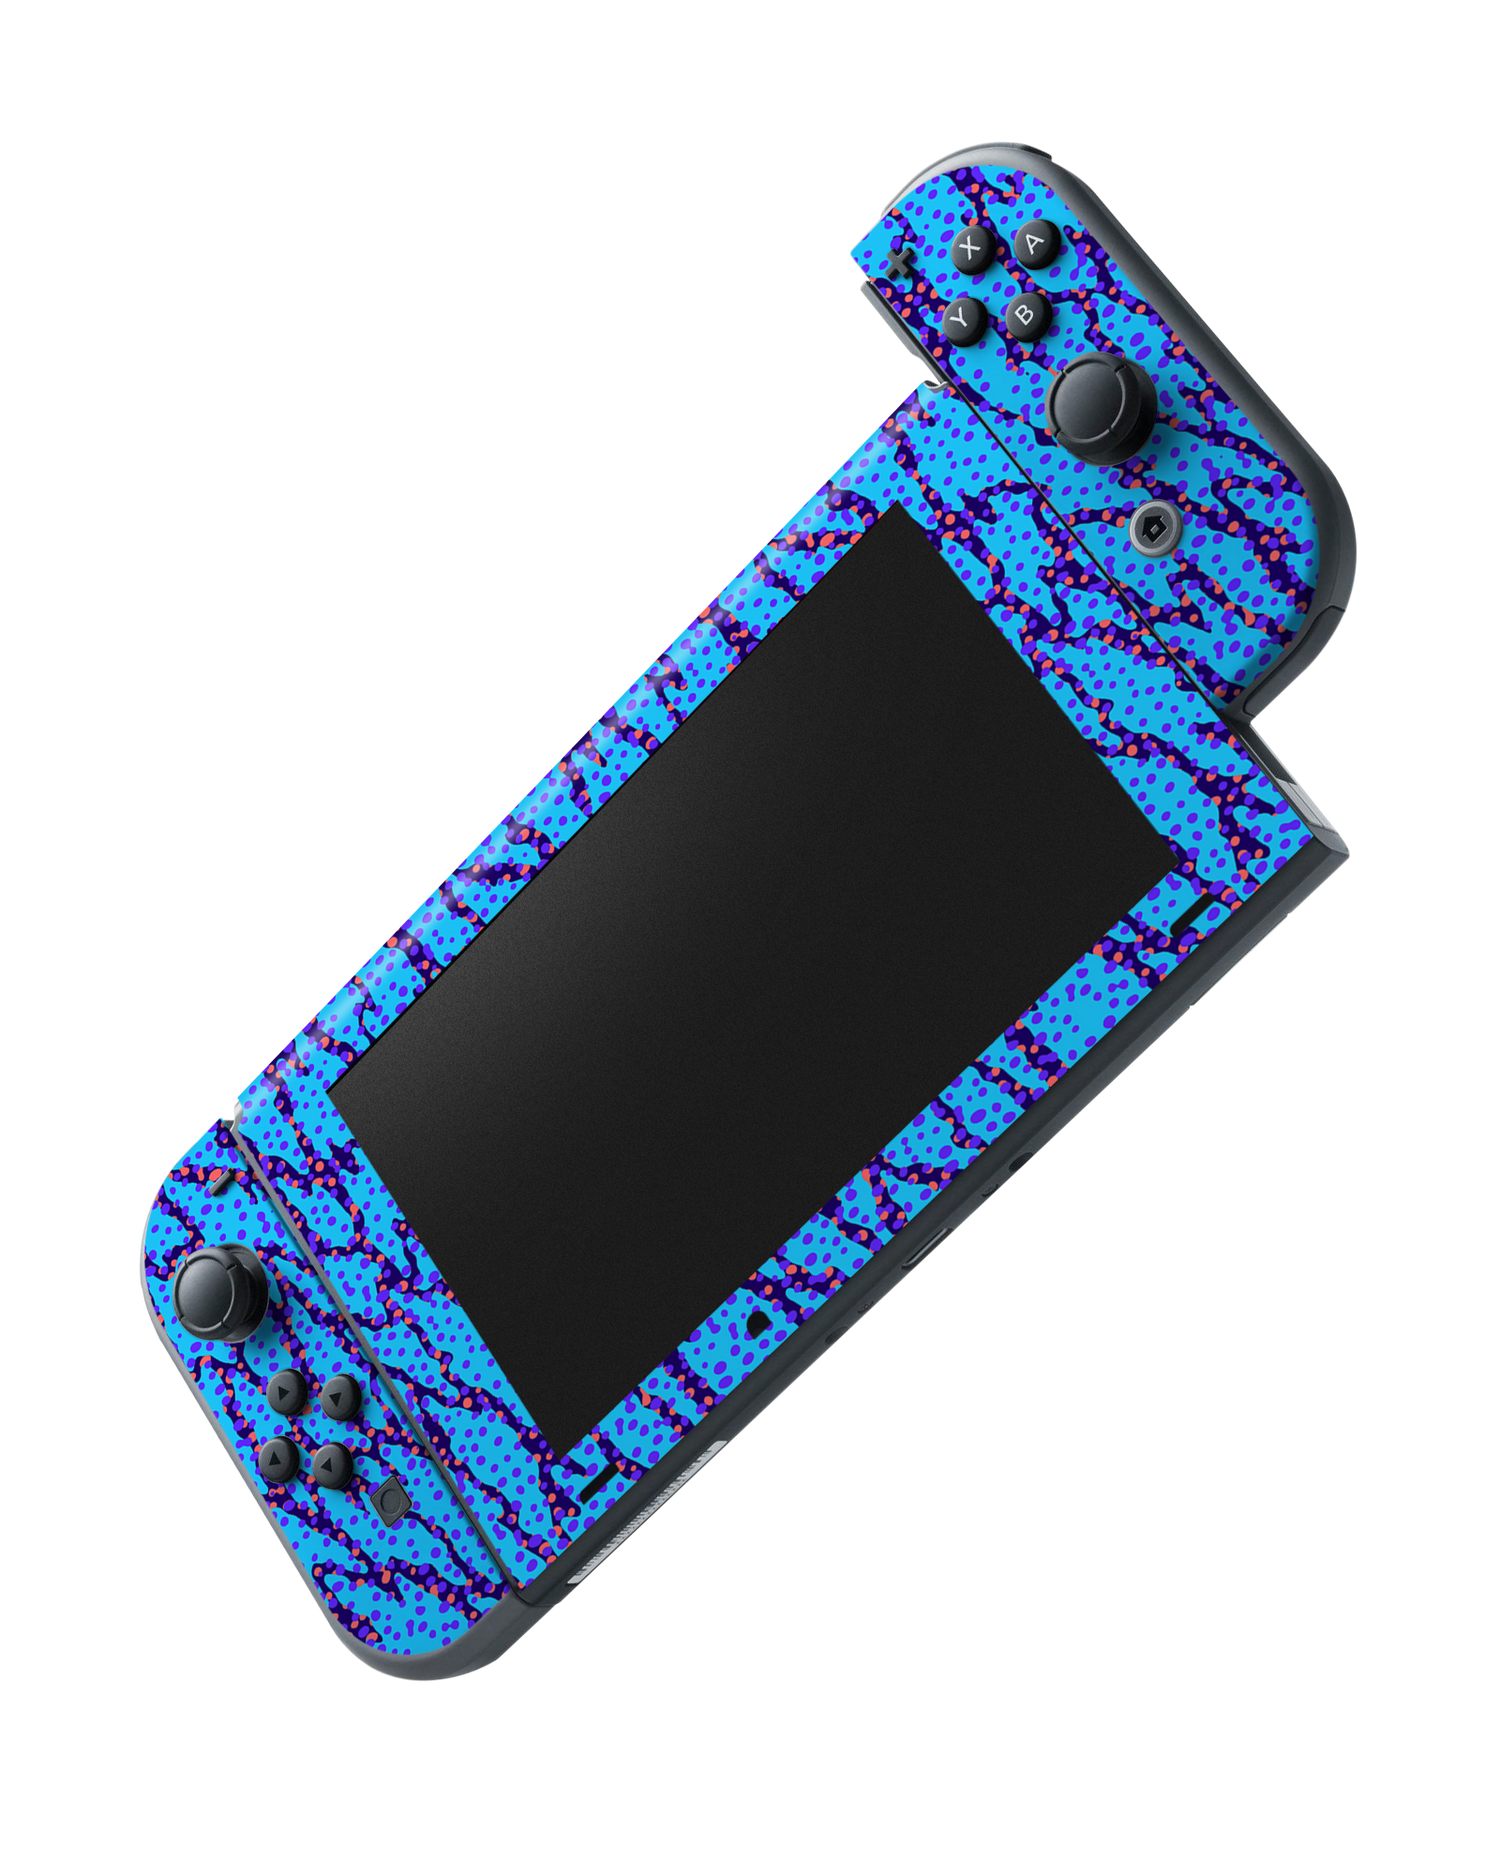 Electric Ocean Console Skin for Nintendo Switch: Joy-Con removing 